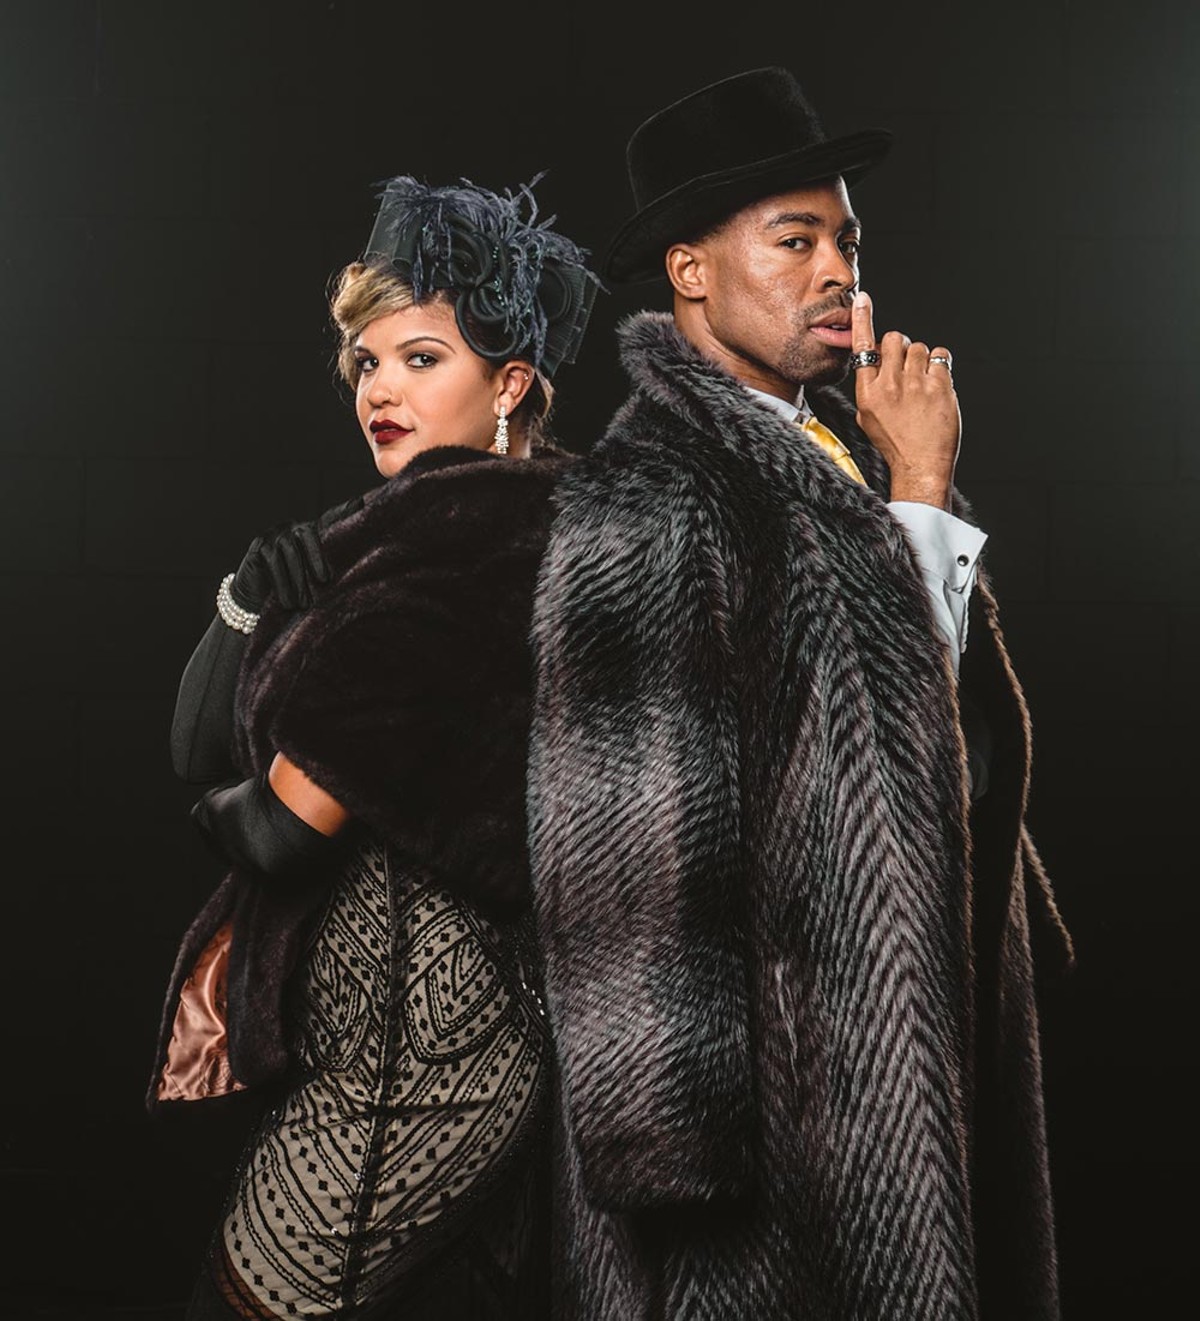 Orlando’s Renaissance Theatre Co. presents their immersive, experiential take on a Harlem jazz club of the 1920s | Arts Stories + Interviews | Orlando